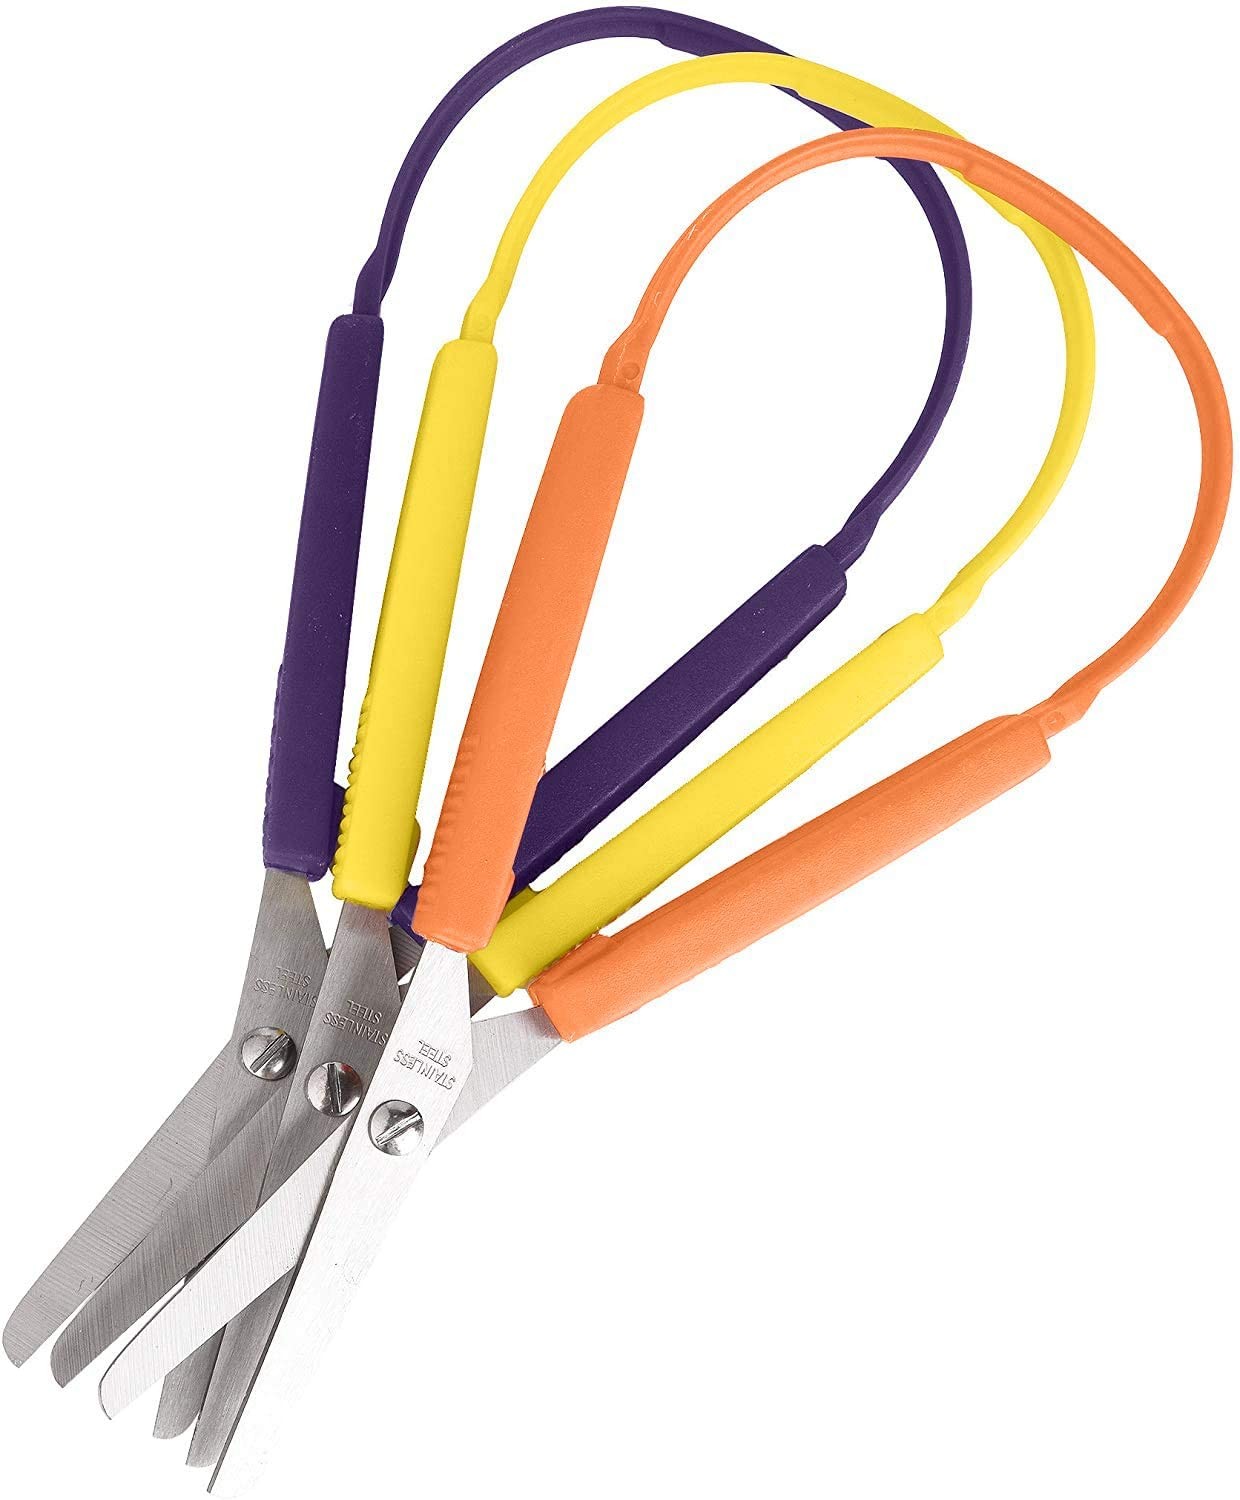 Loop Scissors for Kids (3-Pack) Colorful Looped, Adaptive Design, Right  and Lefty Support, Small, Easy-Open Squeeze Handles